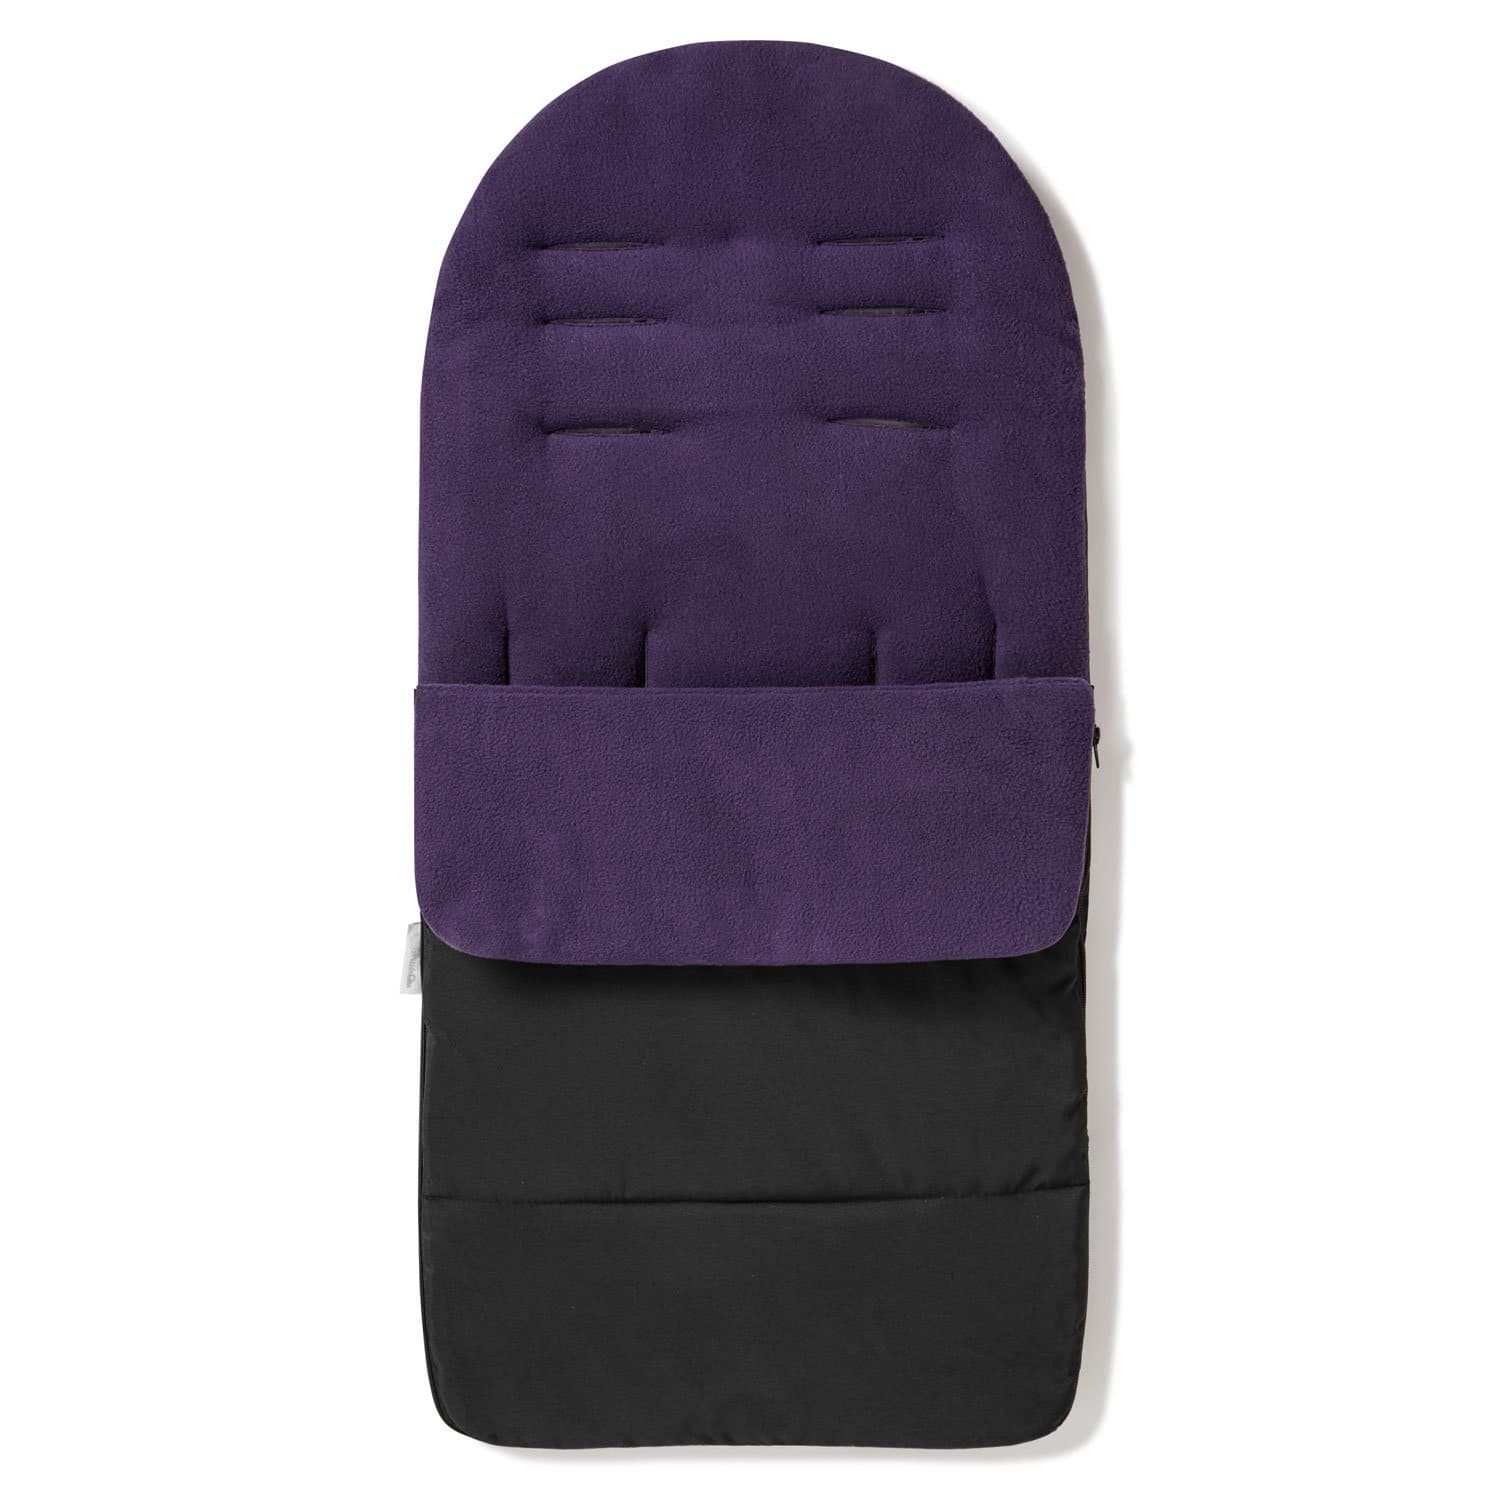 Premium Footmuff / Cosy Toes Compatible with Venicci - Plum Purple / Fits All Models | For Your Little One